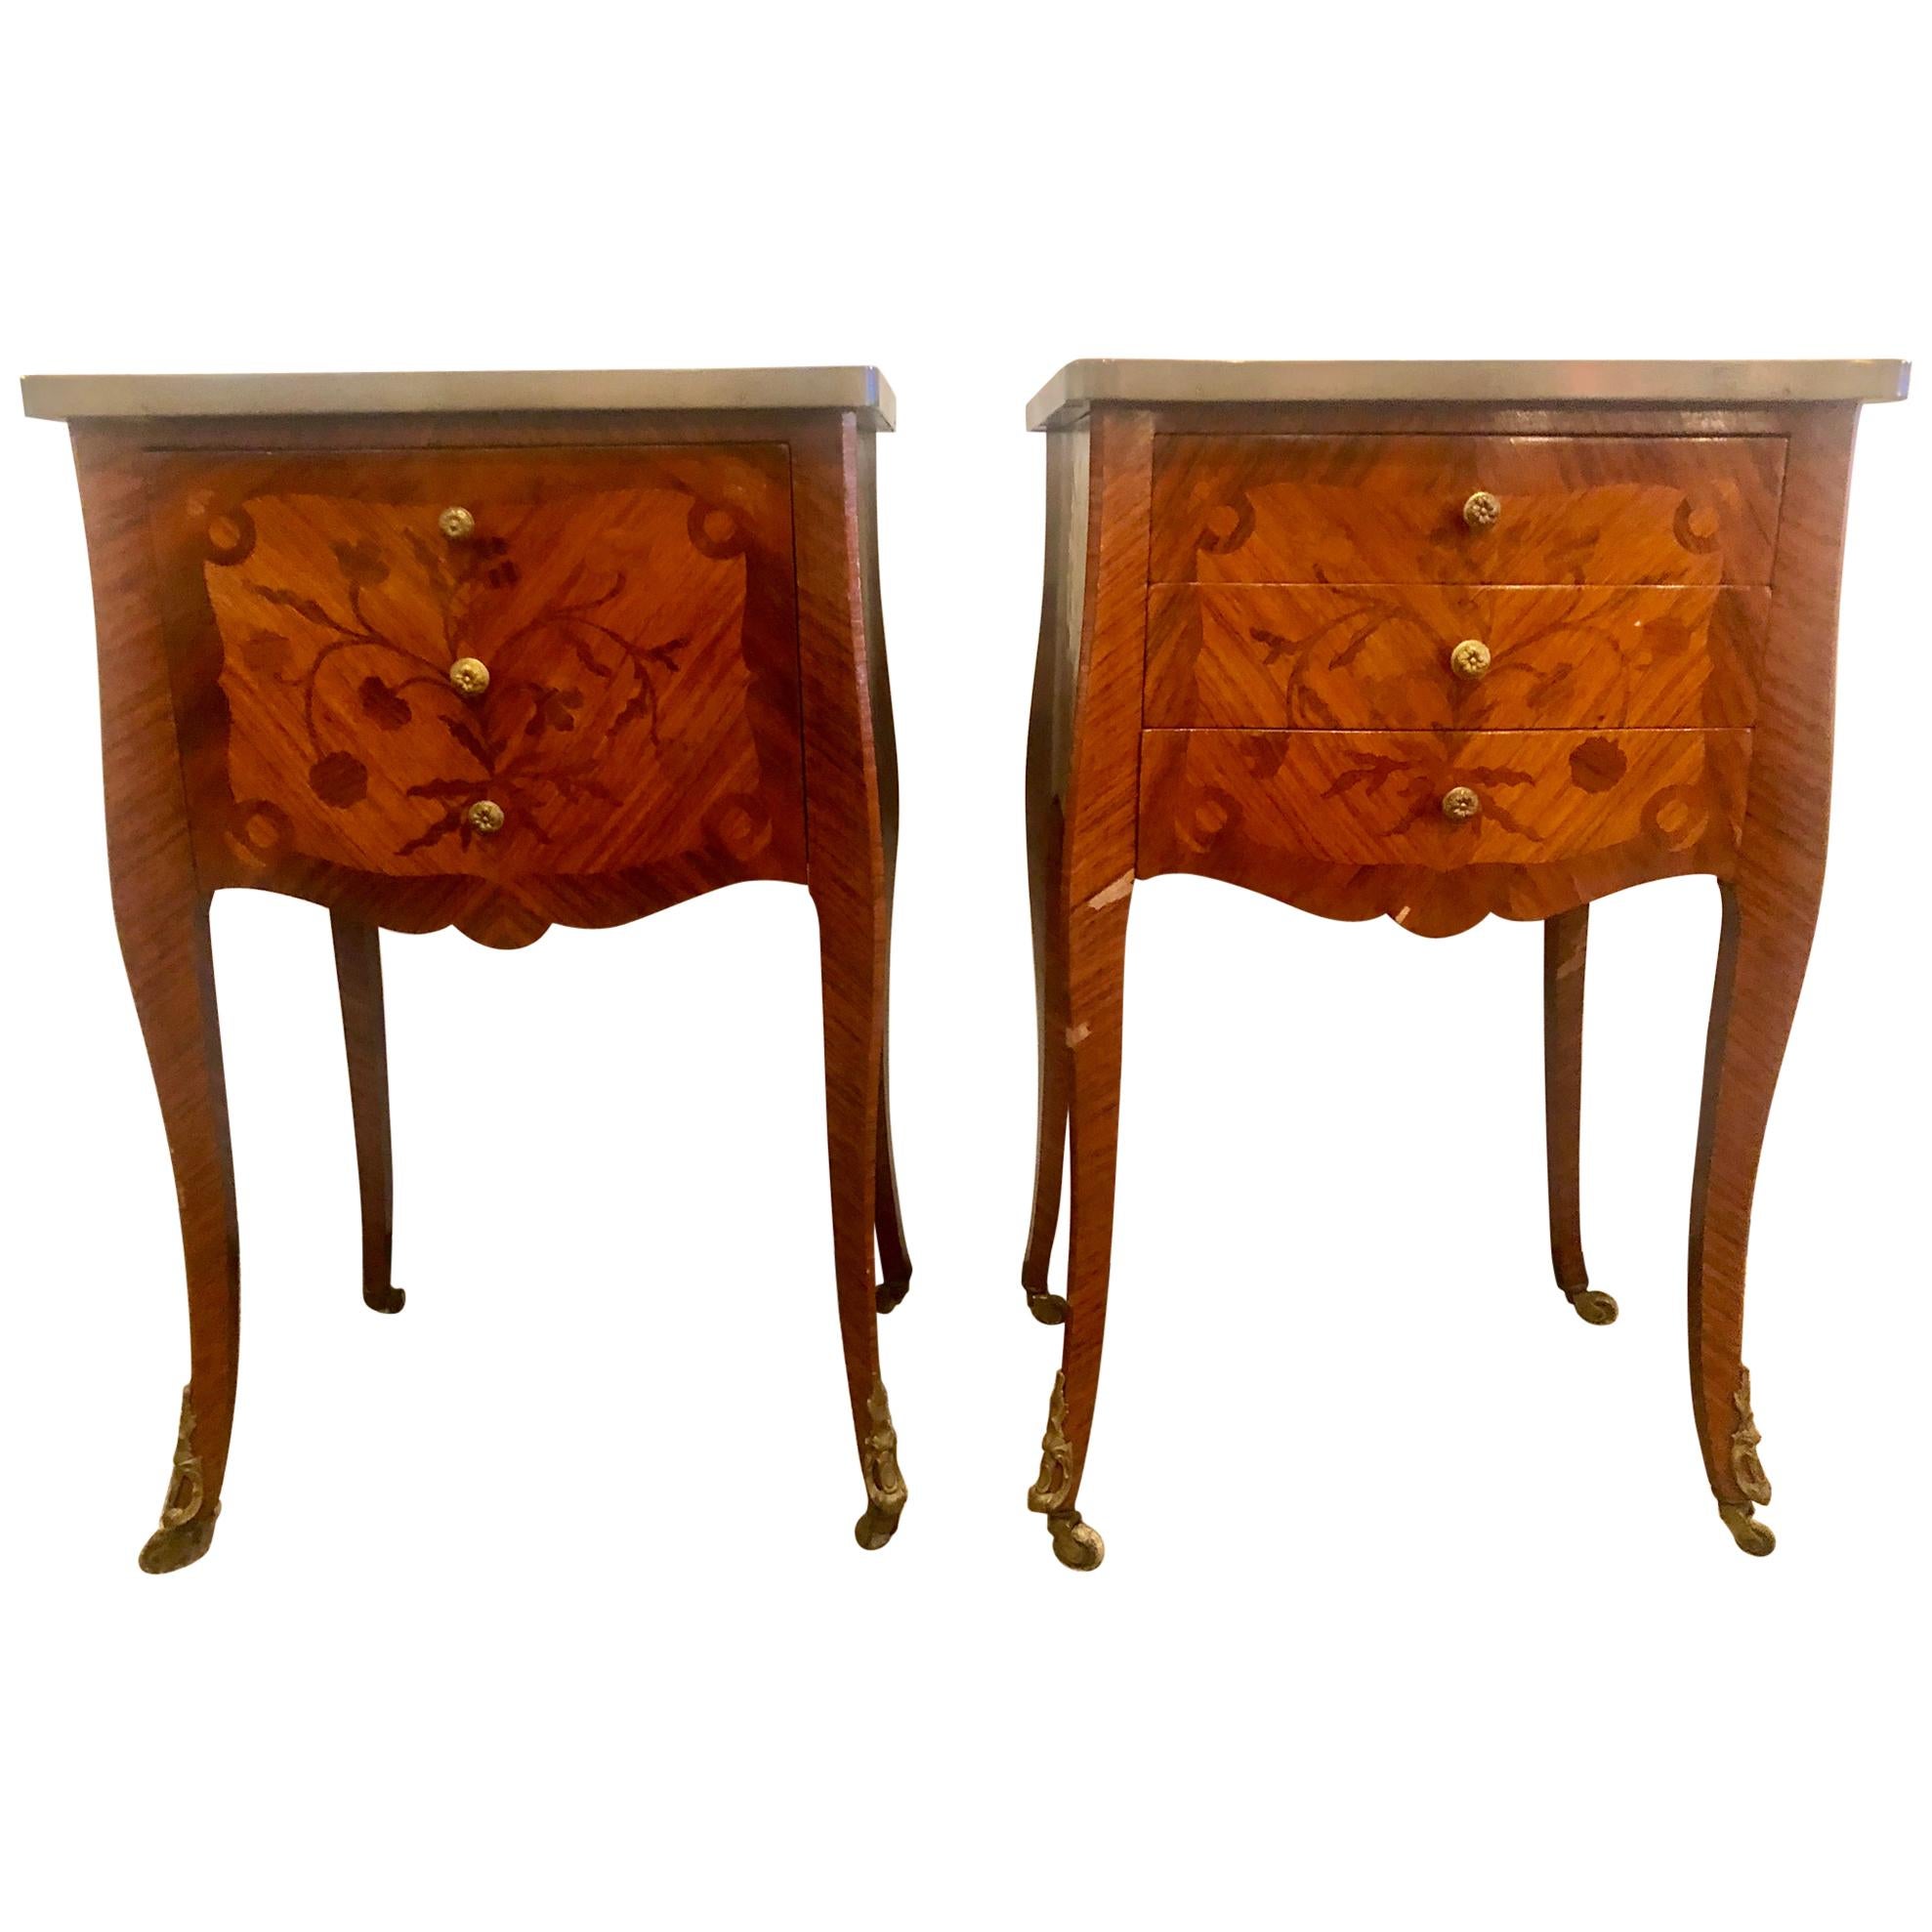 Pair of French Louis XV Style Stands, End Tables, Side Tables or Night Tables